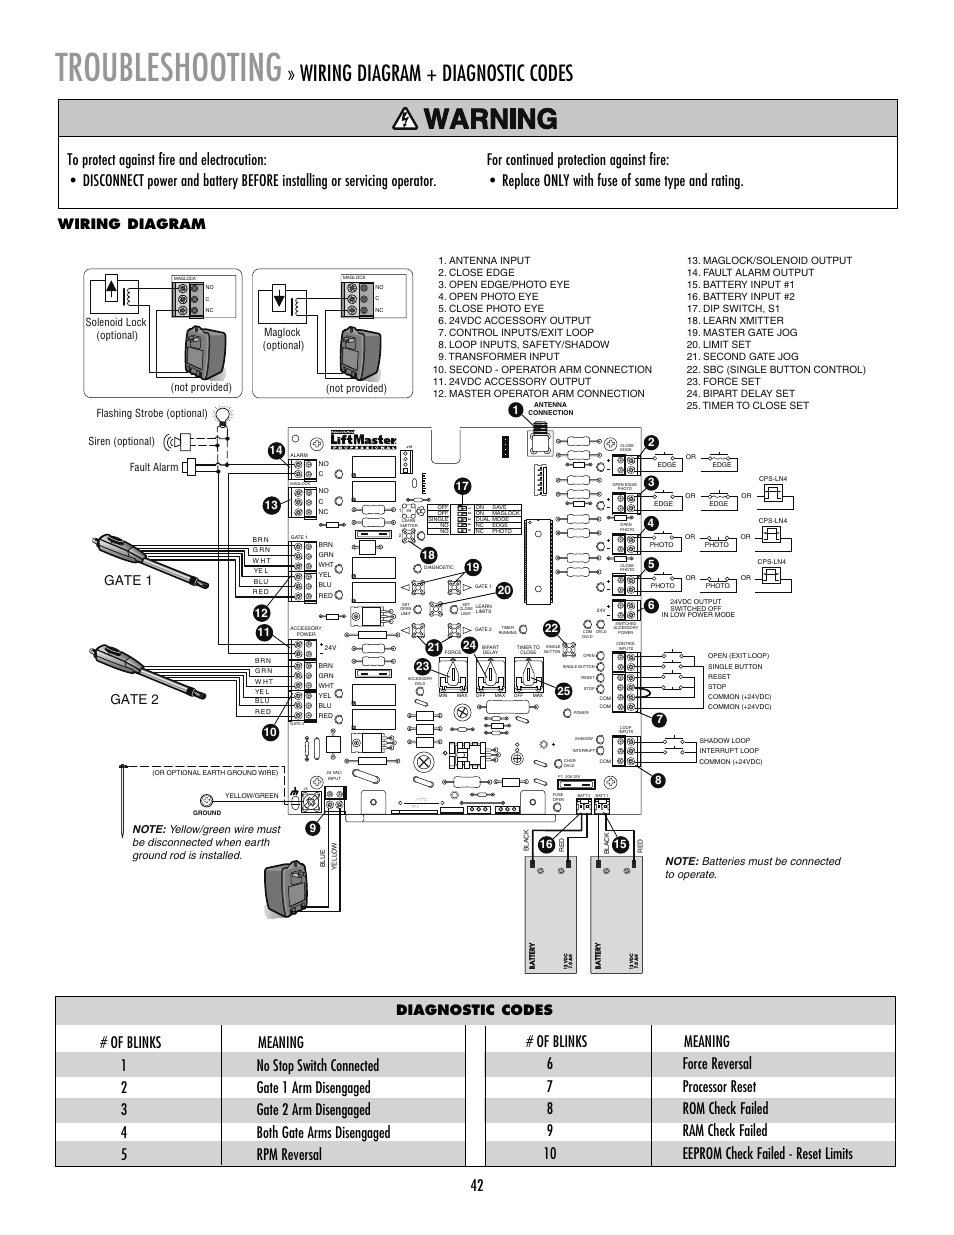 Tommy Liftgate Wiring Diagram from www.manualsdir.com